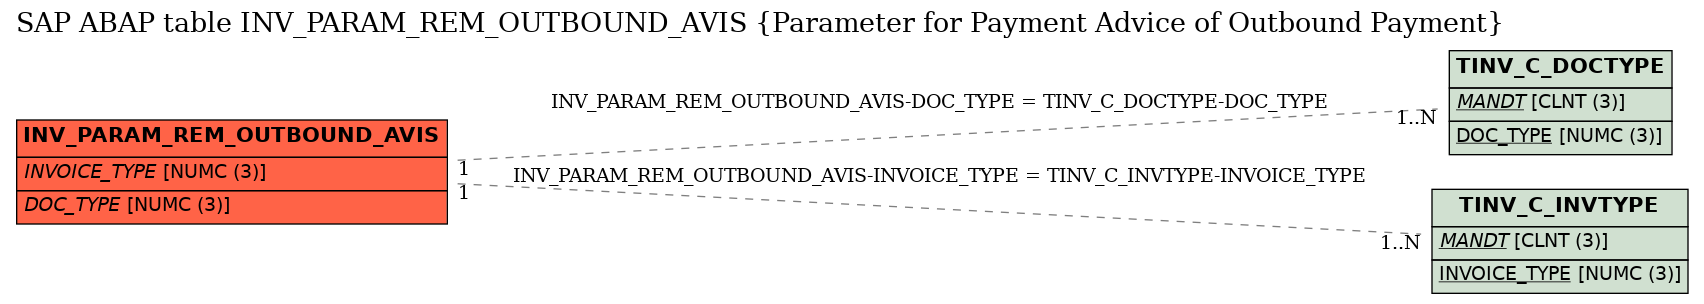 E-R Diagram for table INV_PARAM_REM_OUTBOUND_AVIS (Parameter for Payment Advice of Outbound Payment)